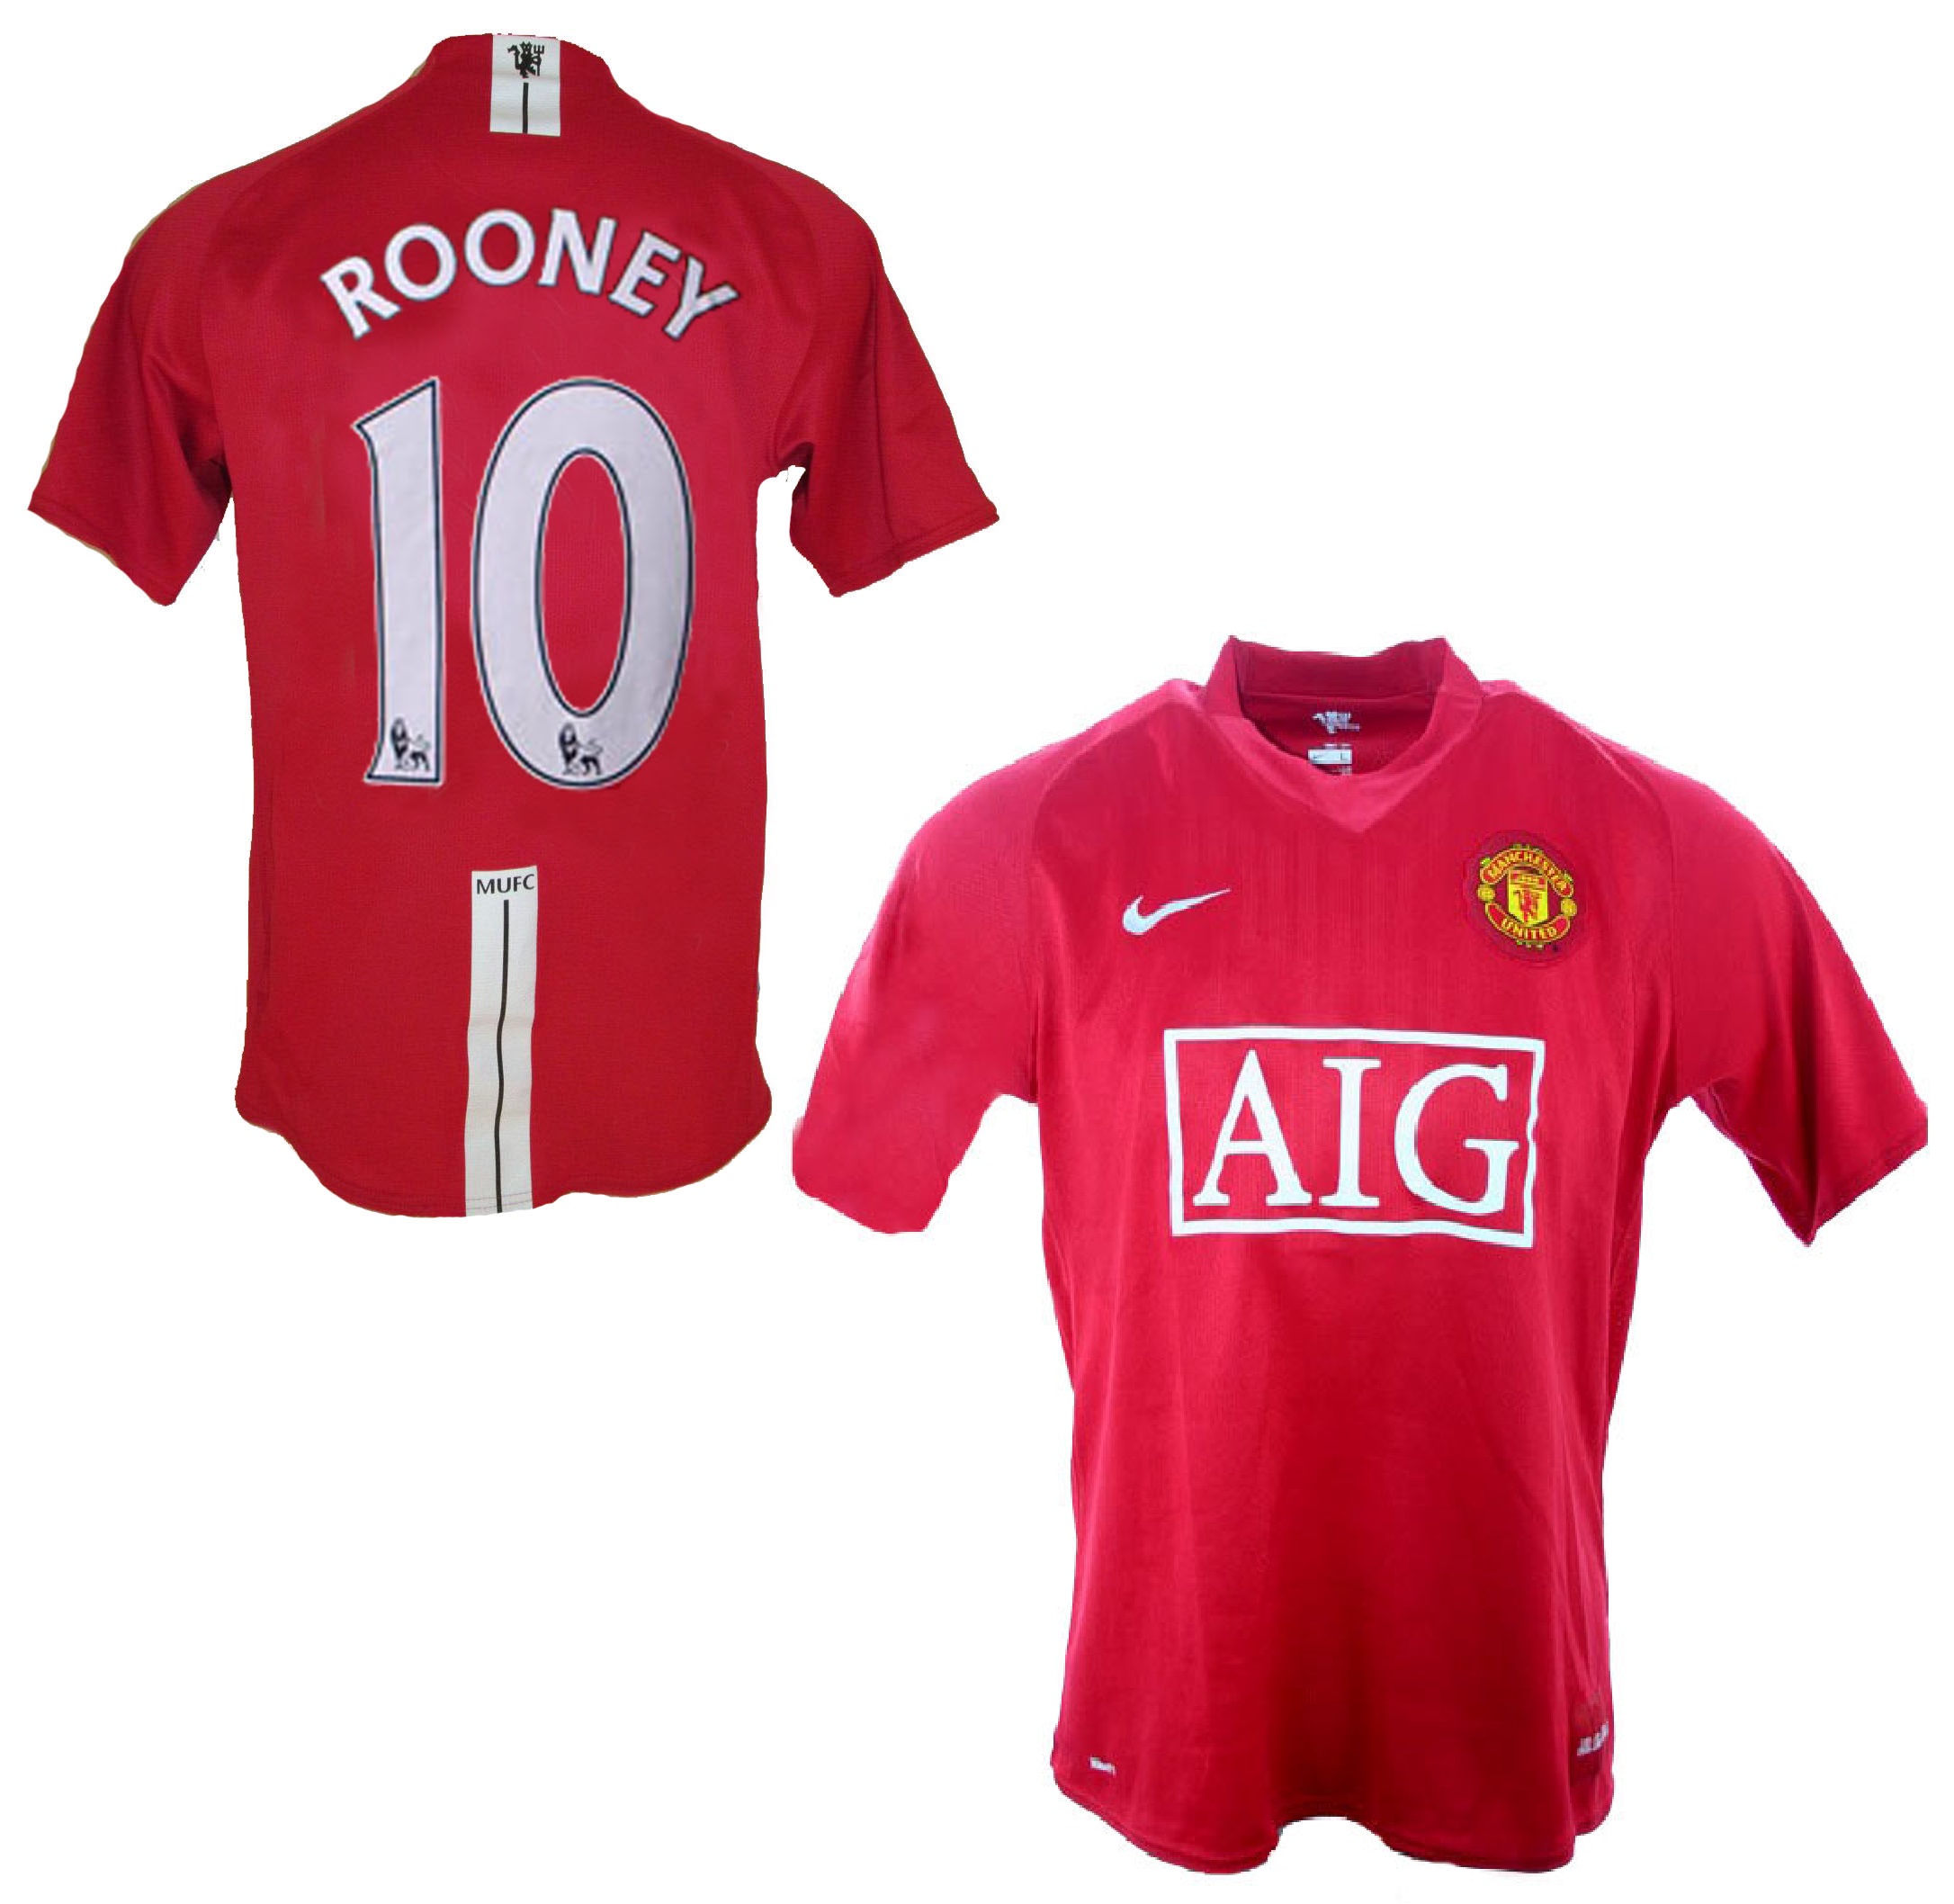 nike aig manchester united jersey